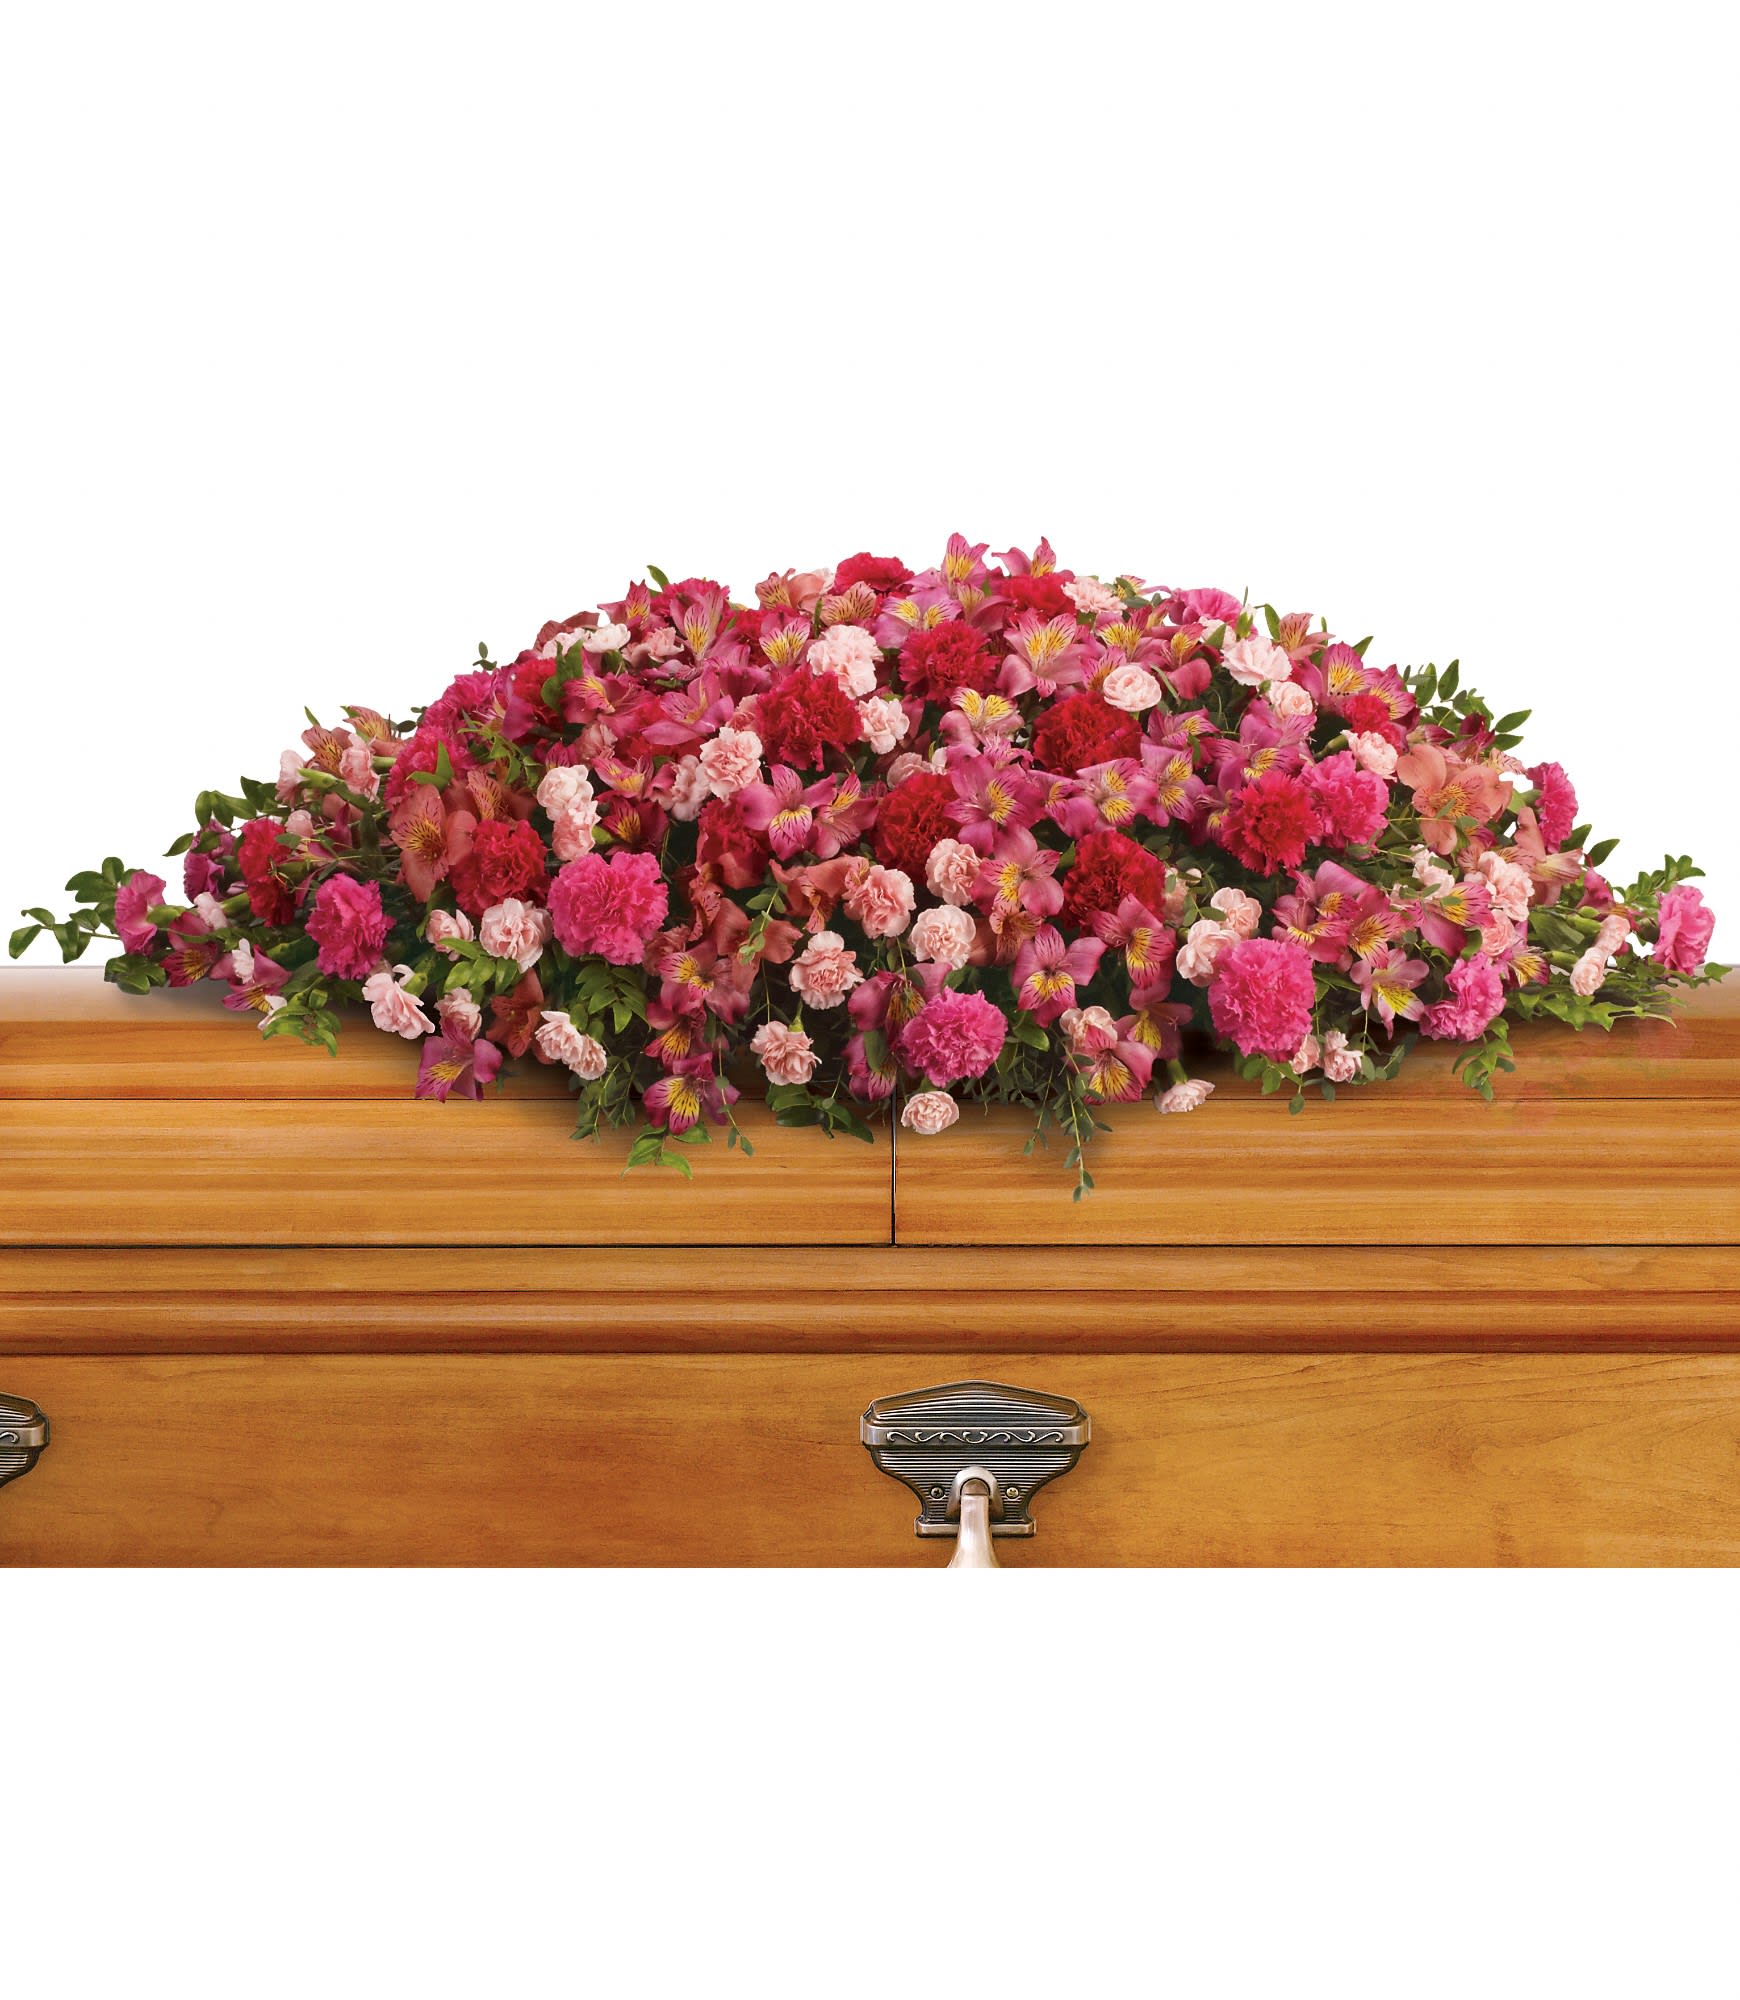 A Life Loved Full Casket Spray by Teleflora *must be ordered 5 Days In Advance* - ***Must Be 5 Days NOTICE***  As a tribute to a special person who has passed, this magnificent cascade of pink floral favorites is a radiant testament of profound and lasting love. 